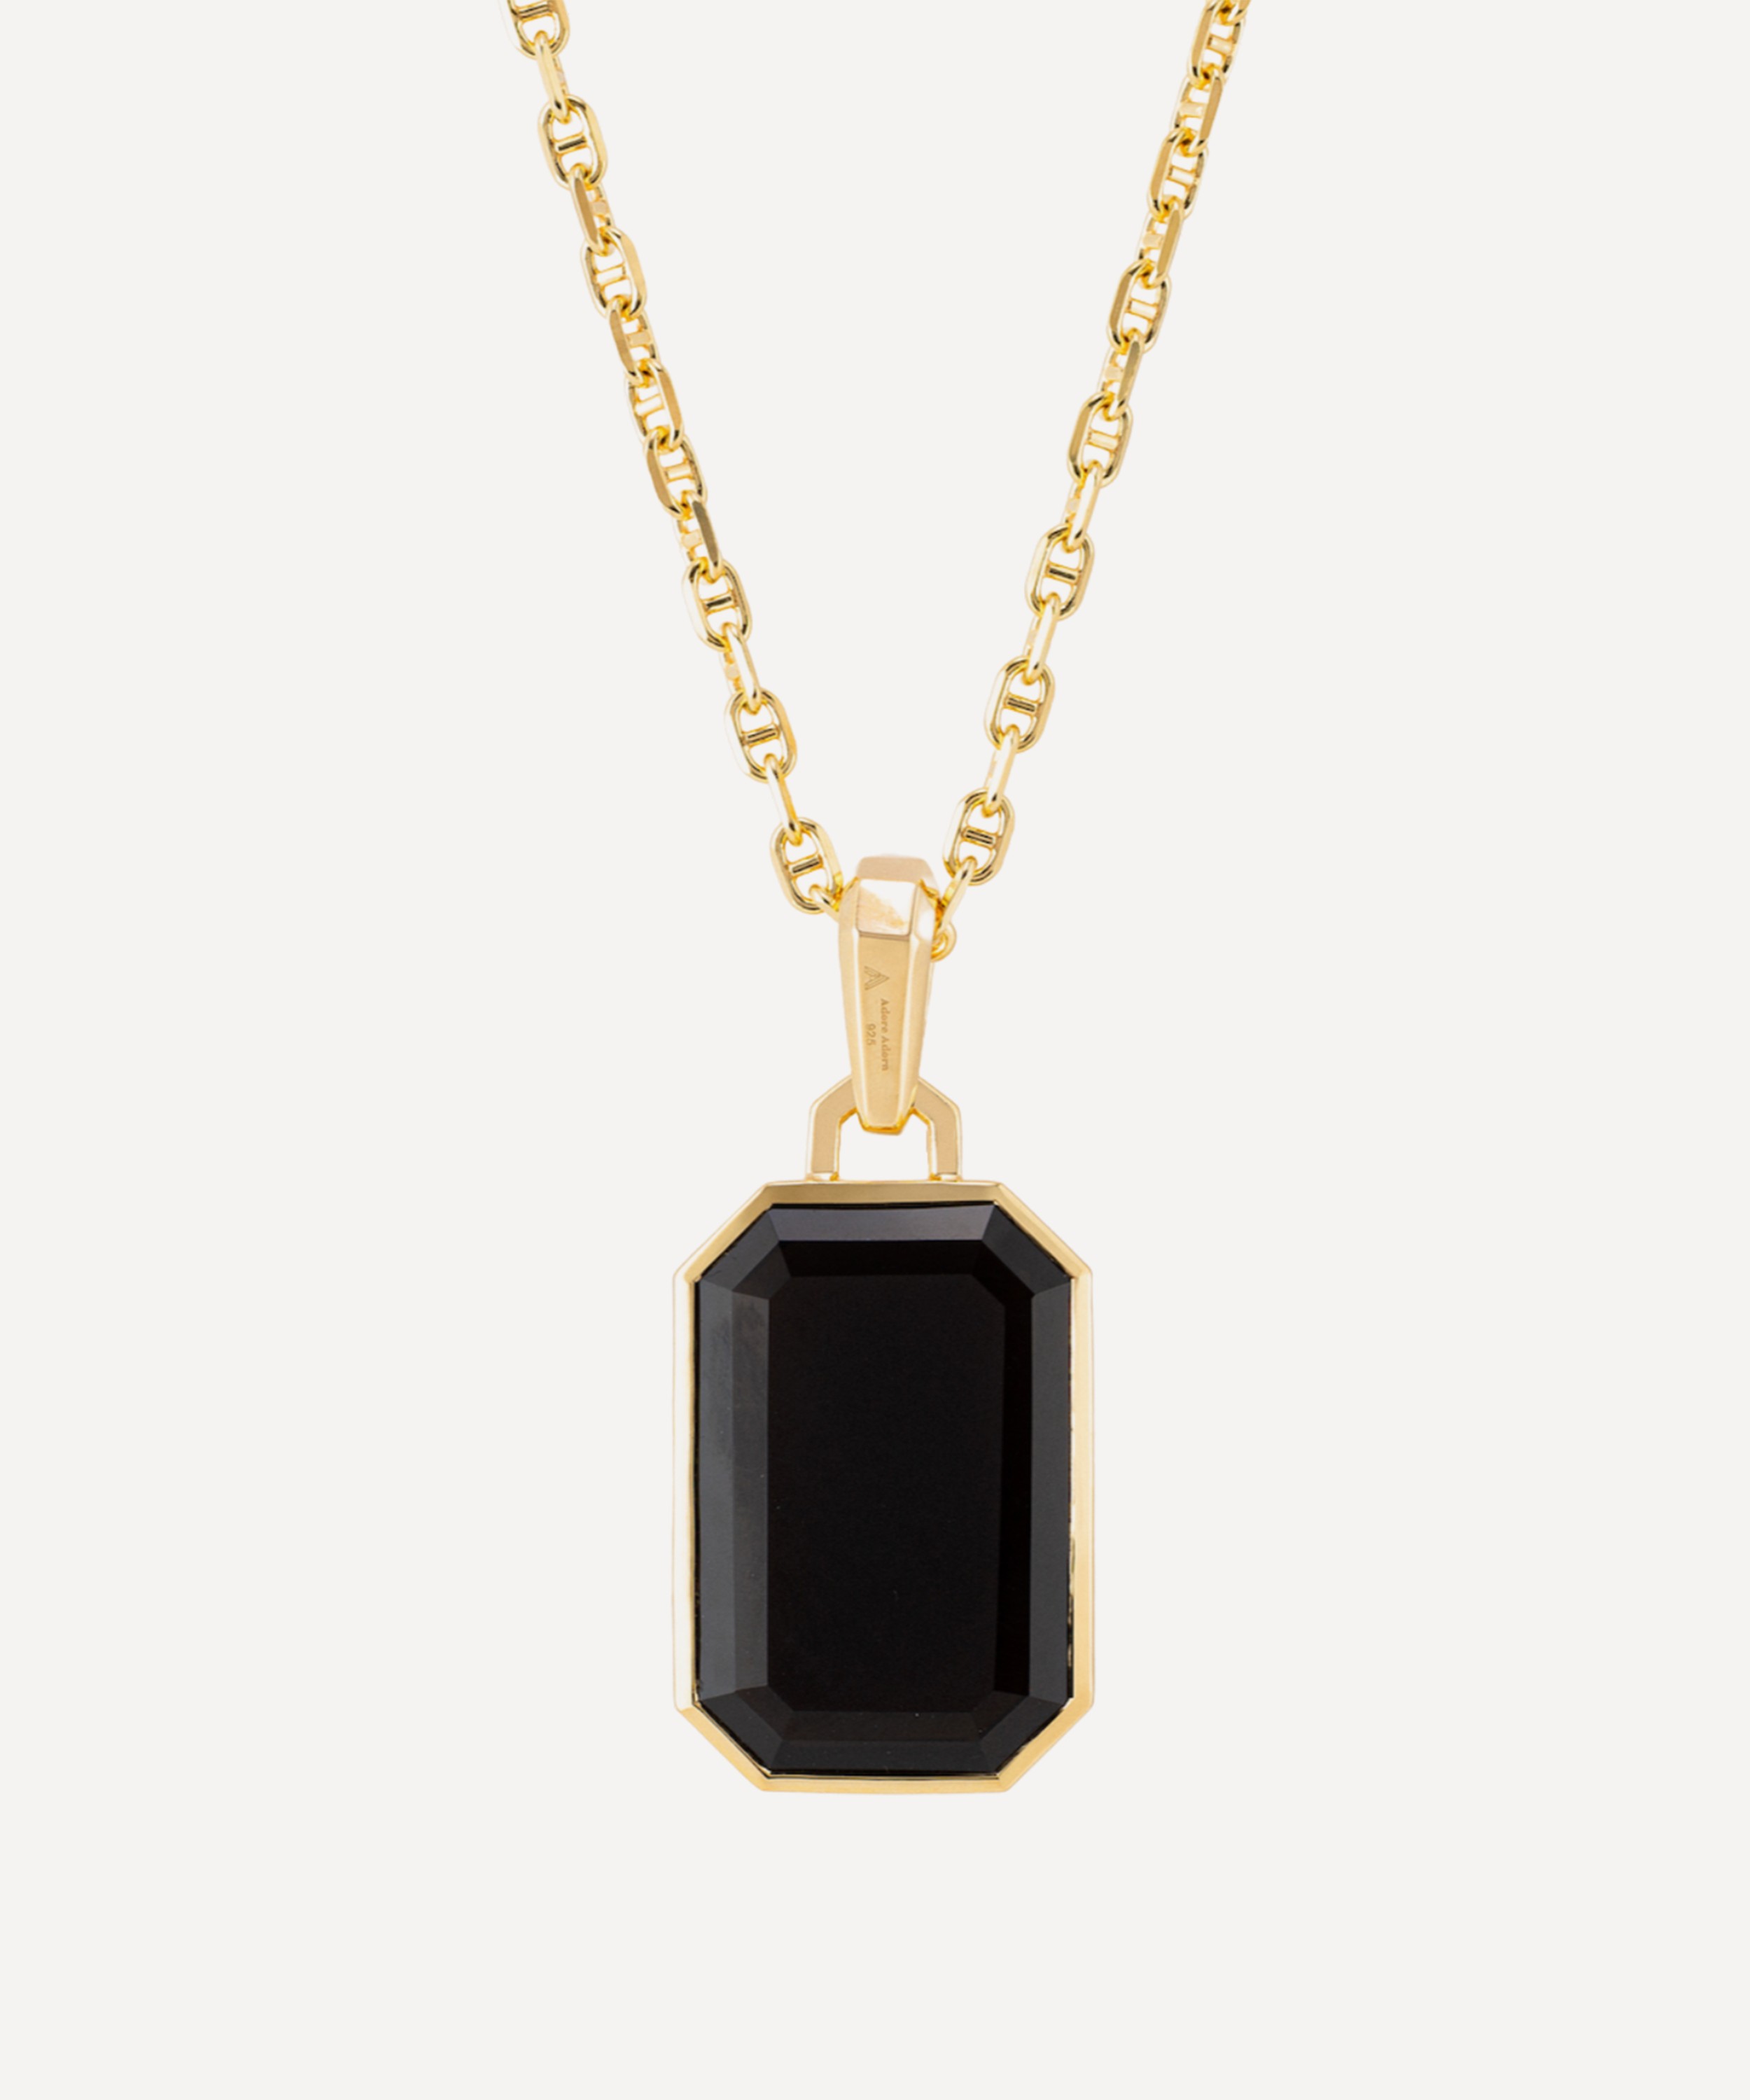 Adore Adorn - 14ct Gold-Plated Smokey Quartz Pendant Necklace image number null